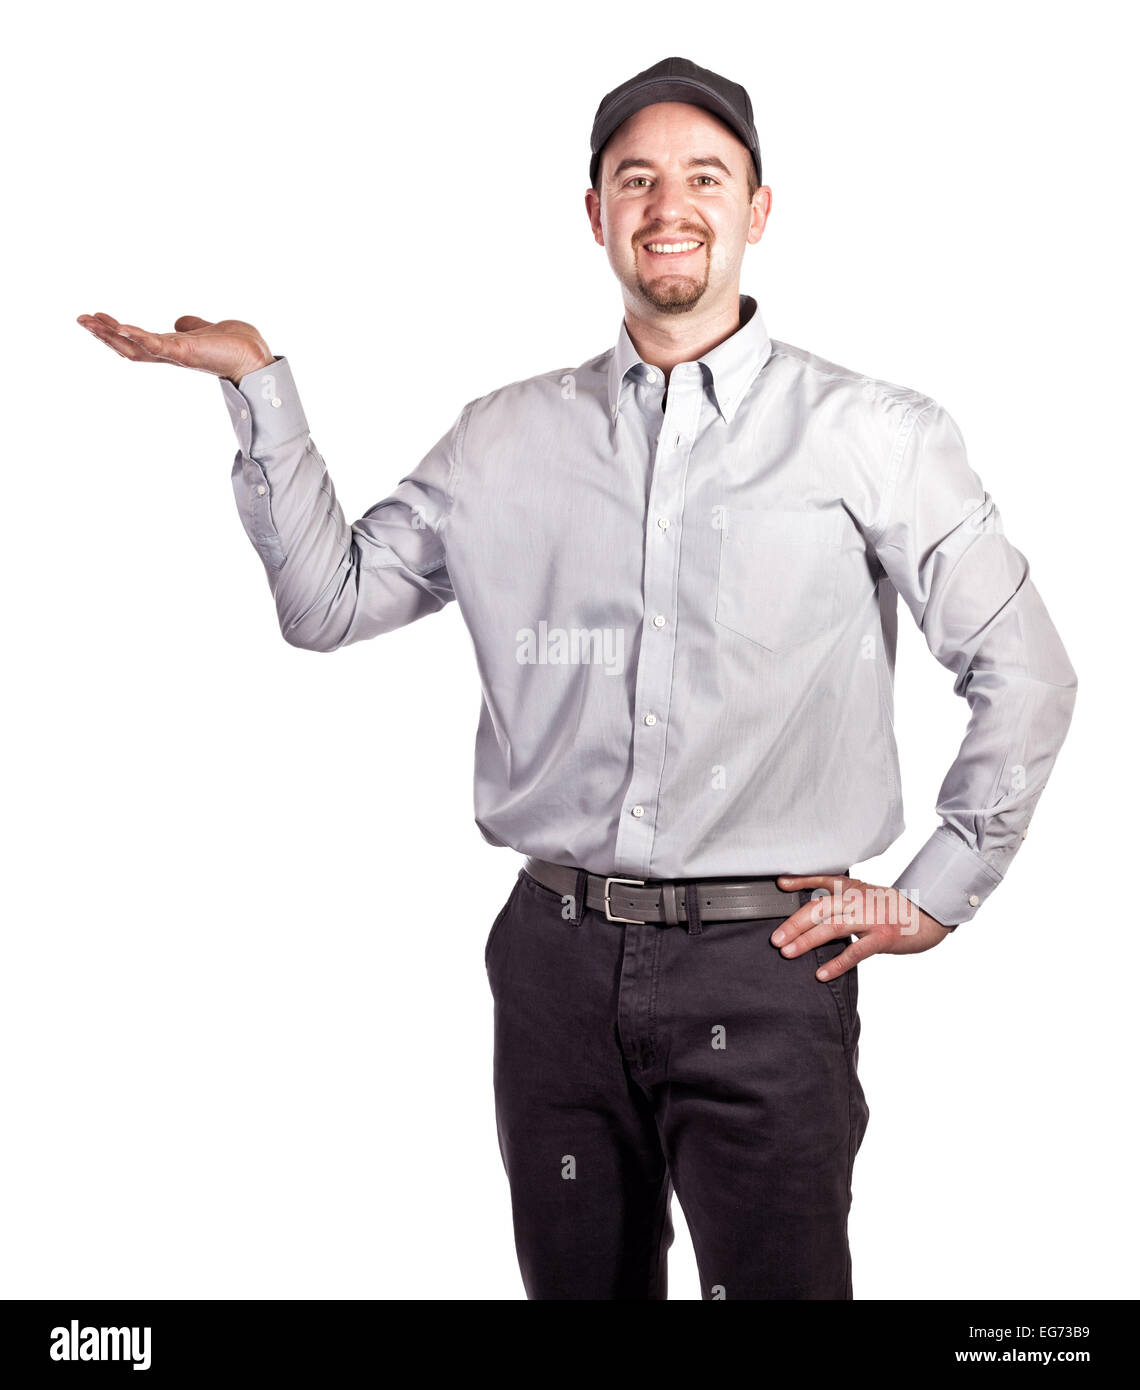 portrait of caucasian delivery man on white background Stock Photo